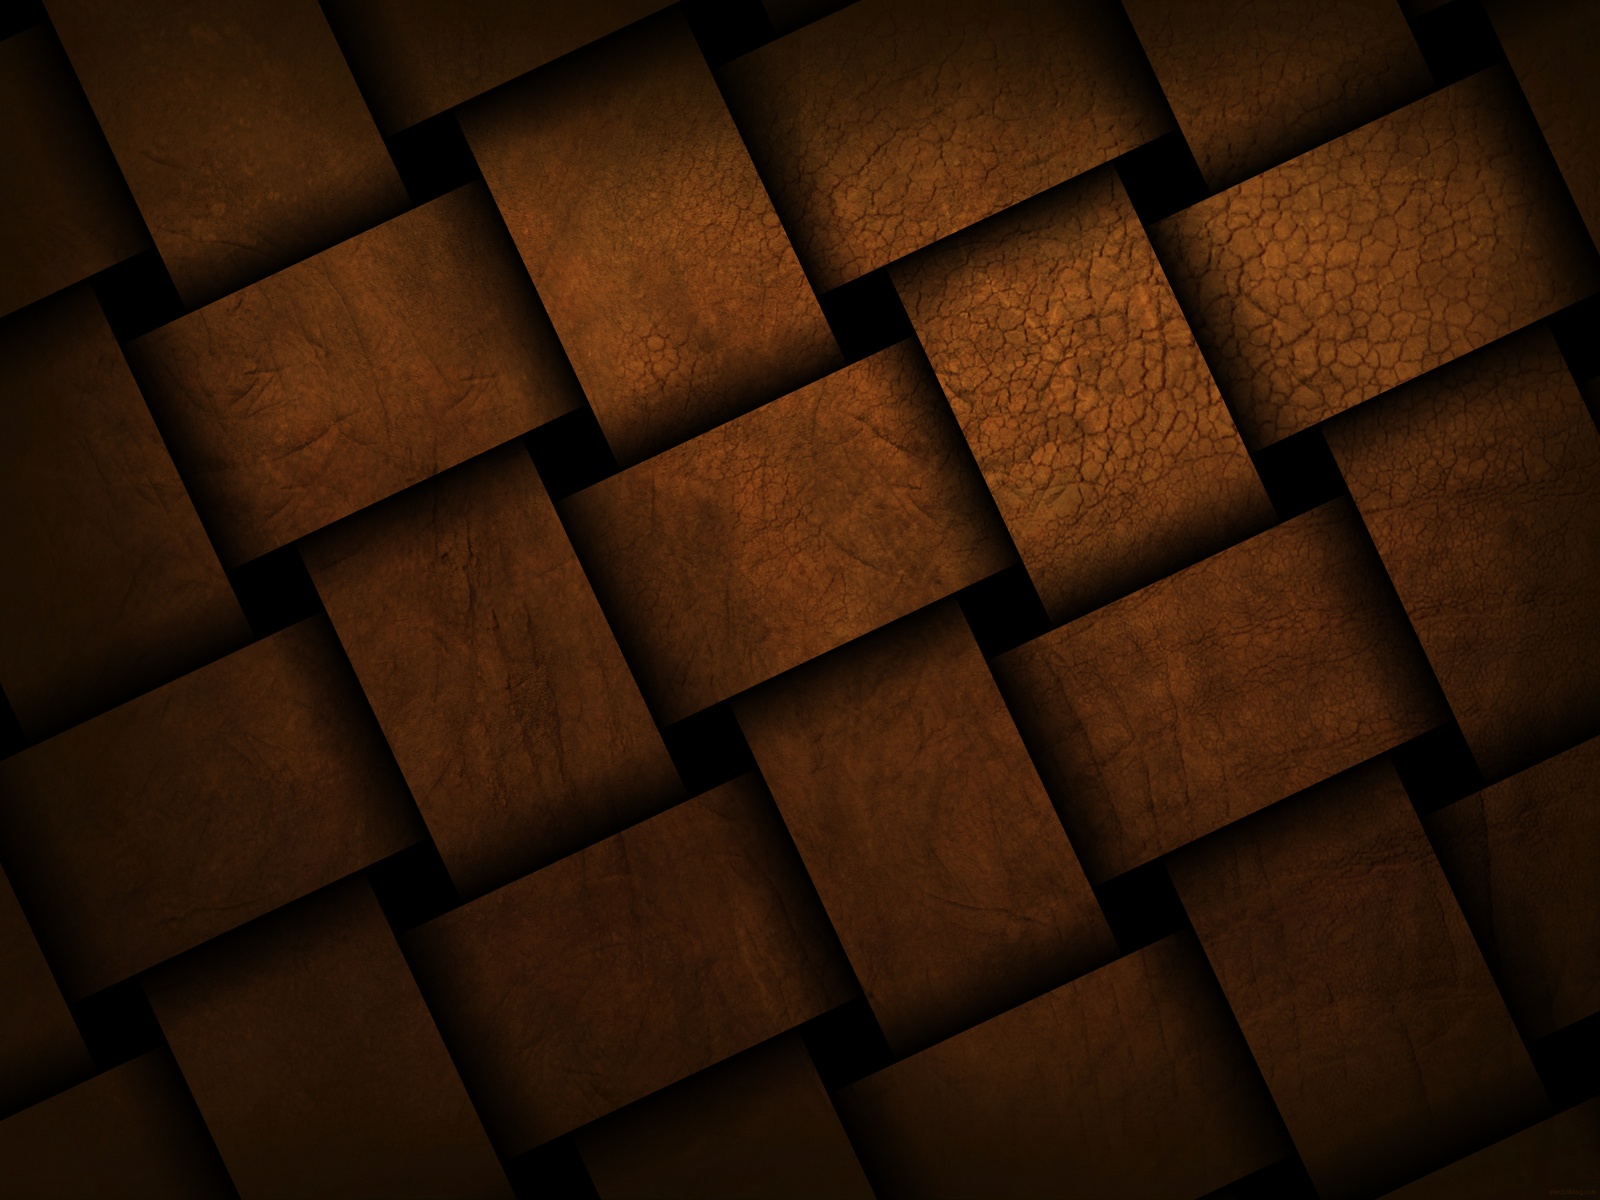  Brown Wallpaper Hd Android Desktop Abstract Iphone Design Backgournd